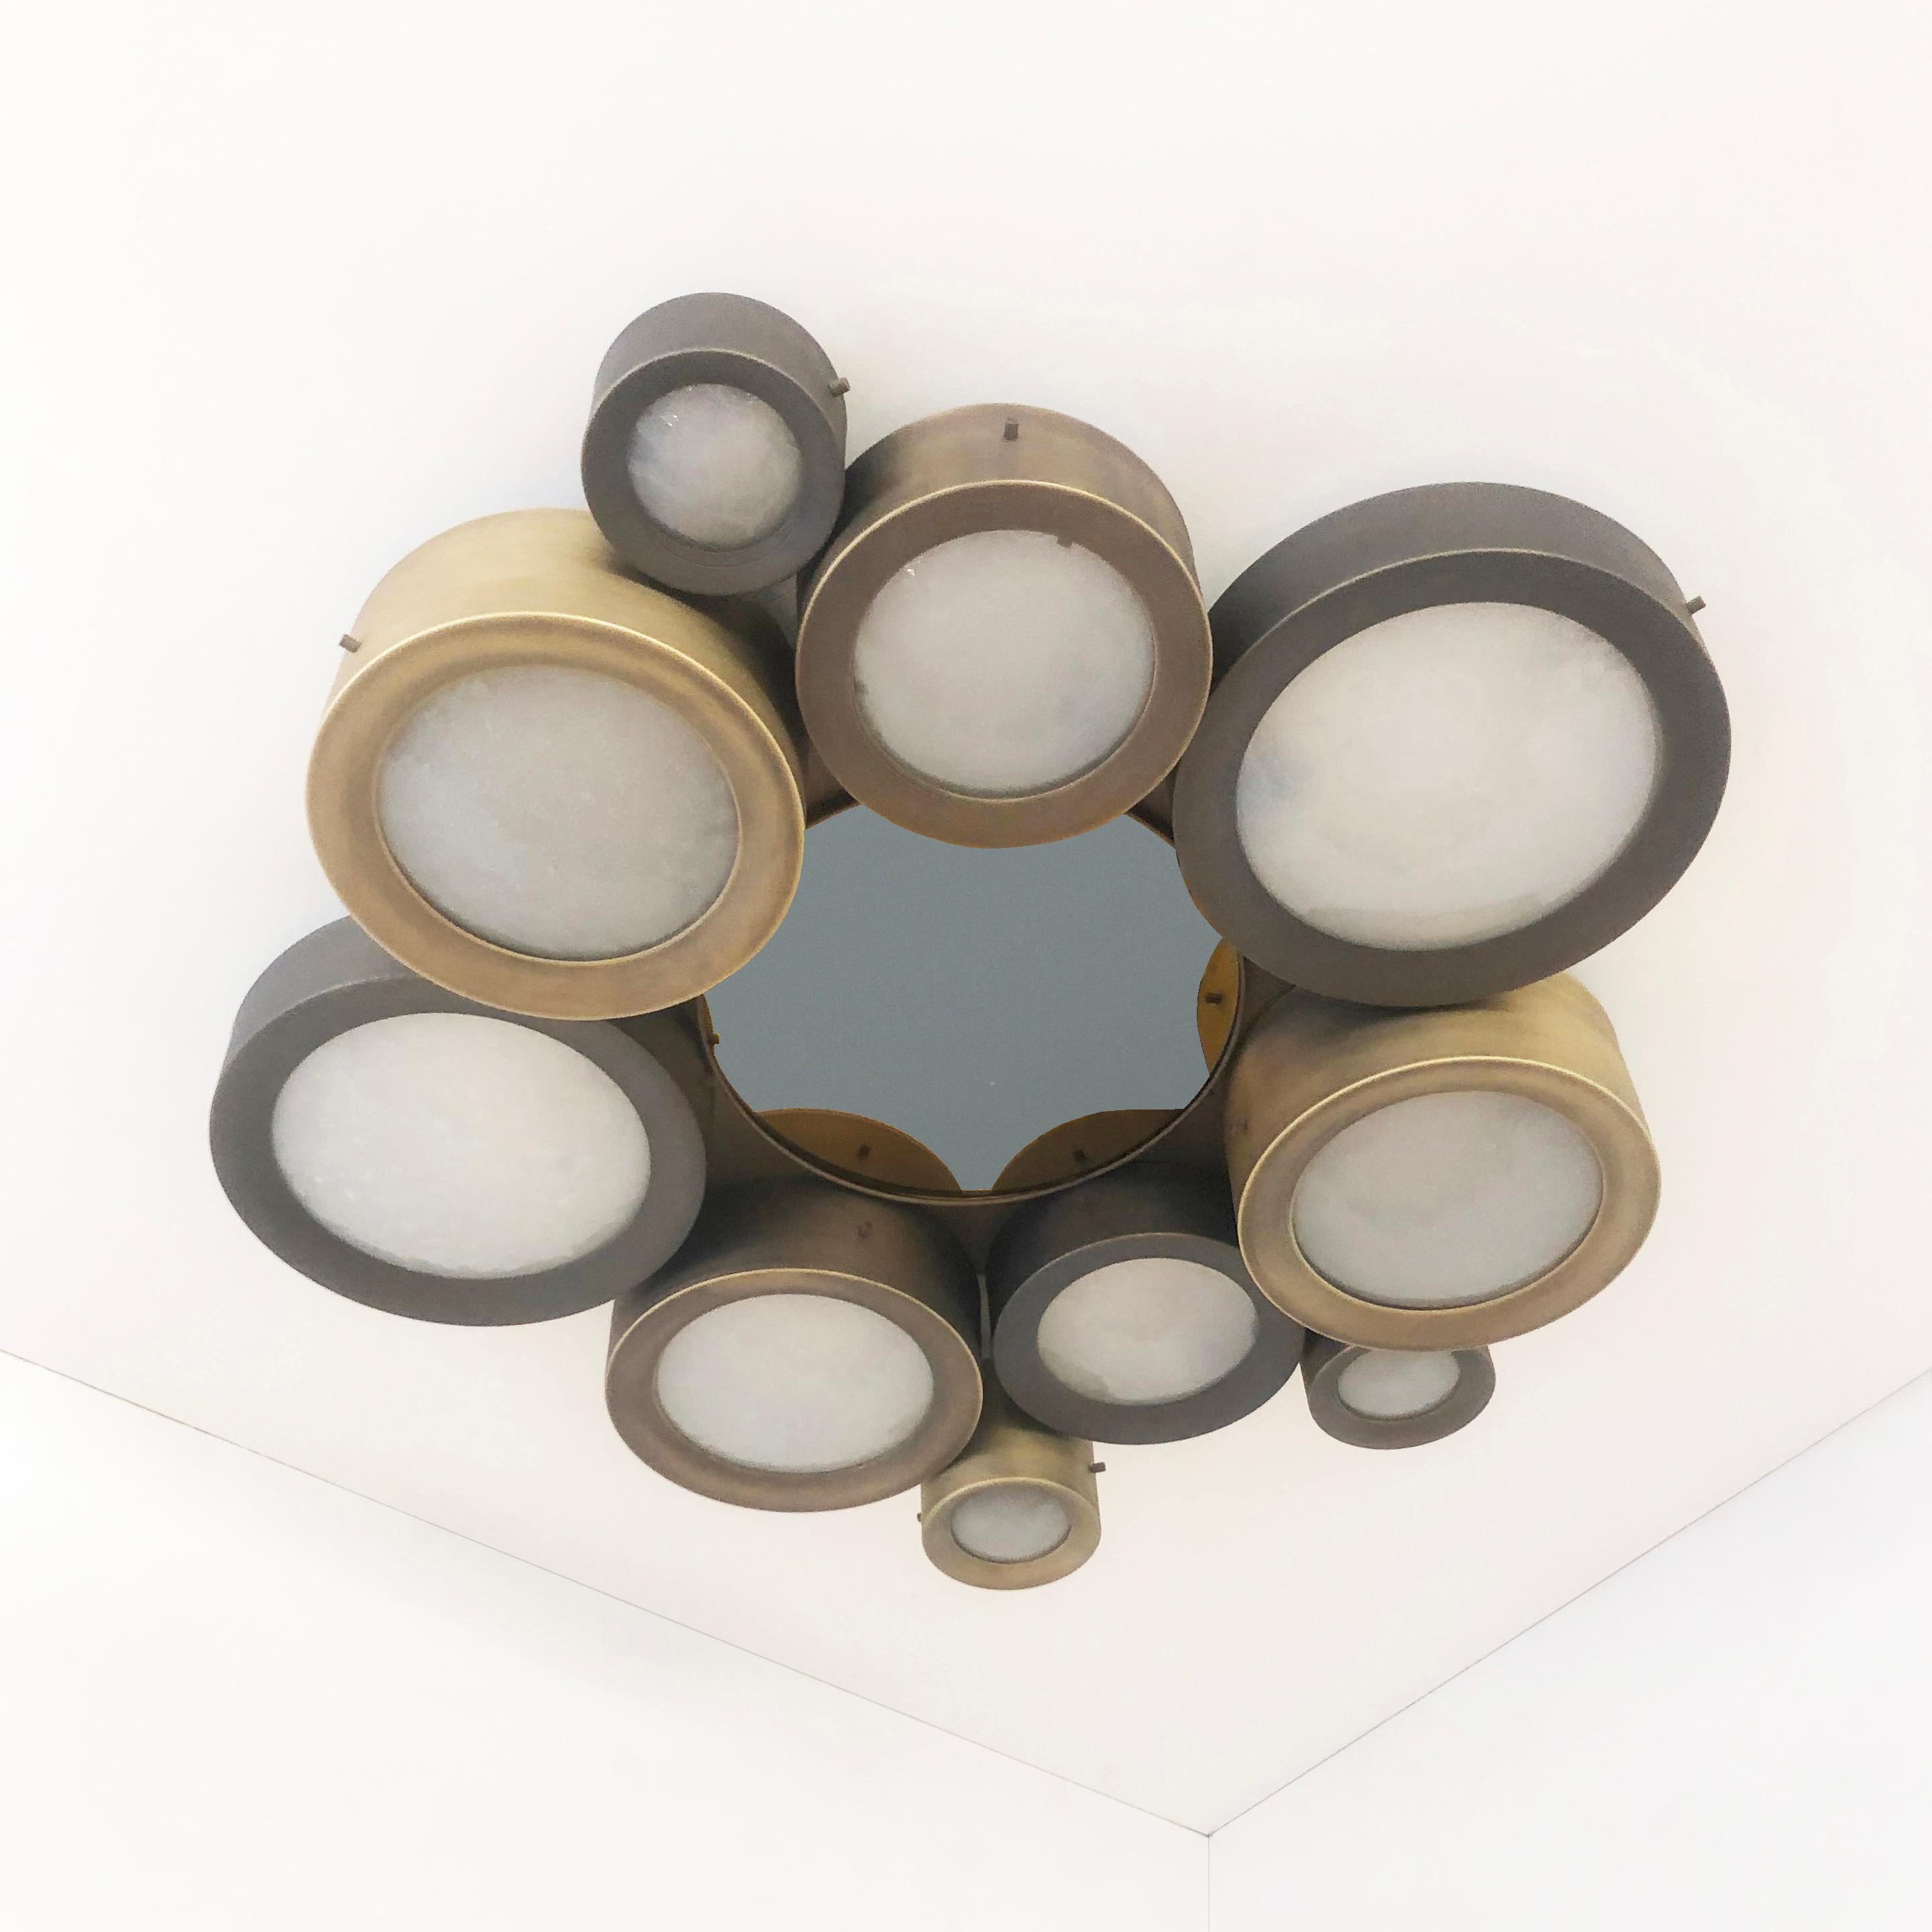 The Helios ceiling light features an imposing composition of illuminated Murano glass shades gravitating around a central tinted mirror. The first images show the fixture in a medley of bronze finishes with a gray center mirror-subsequent pictures